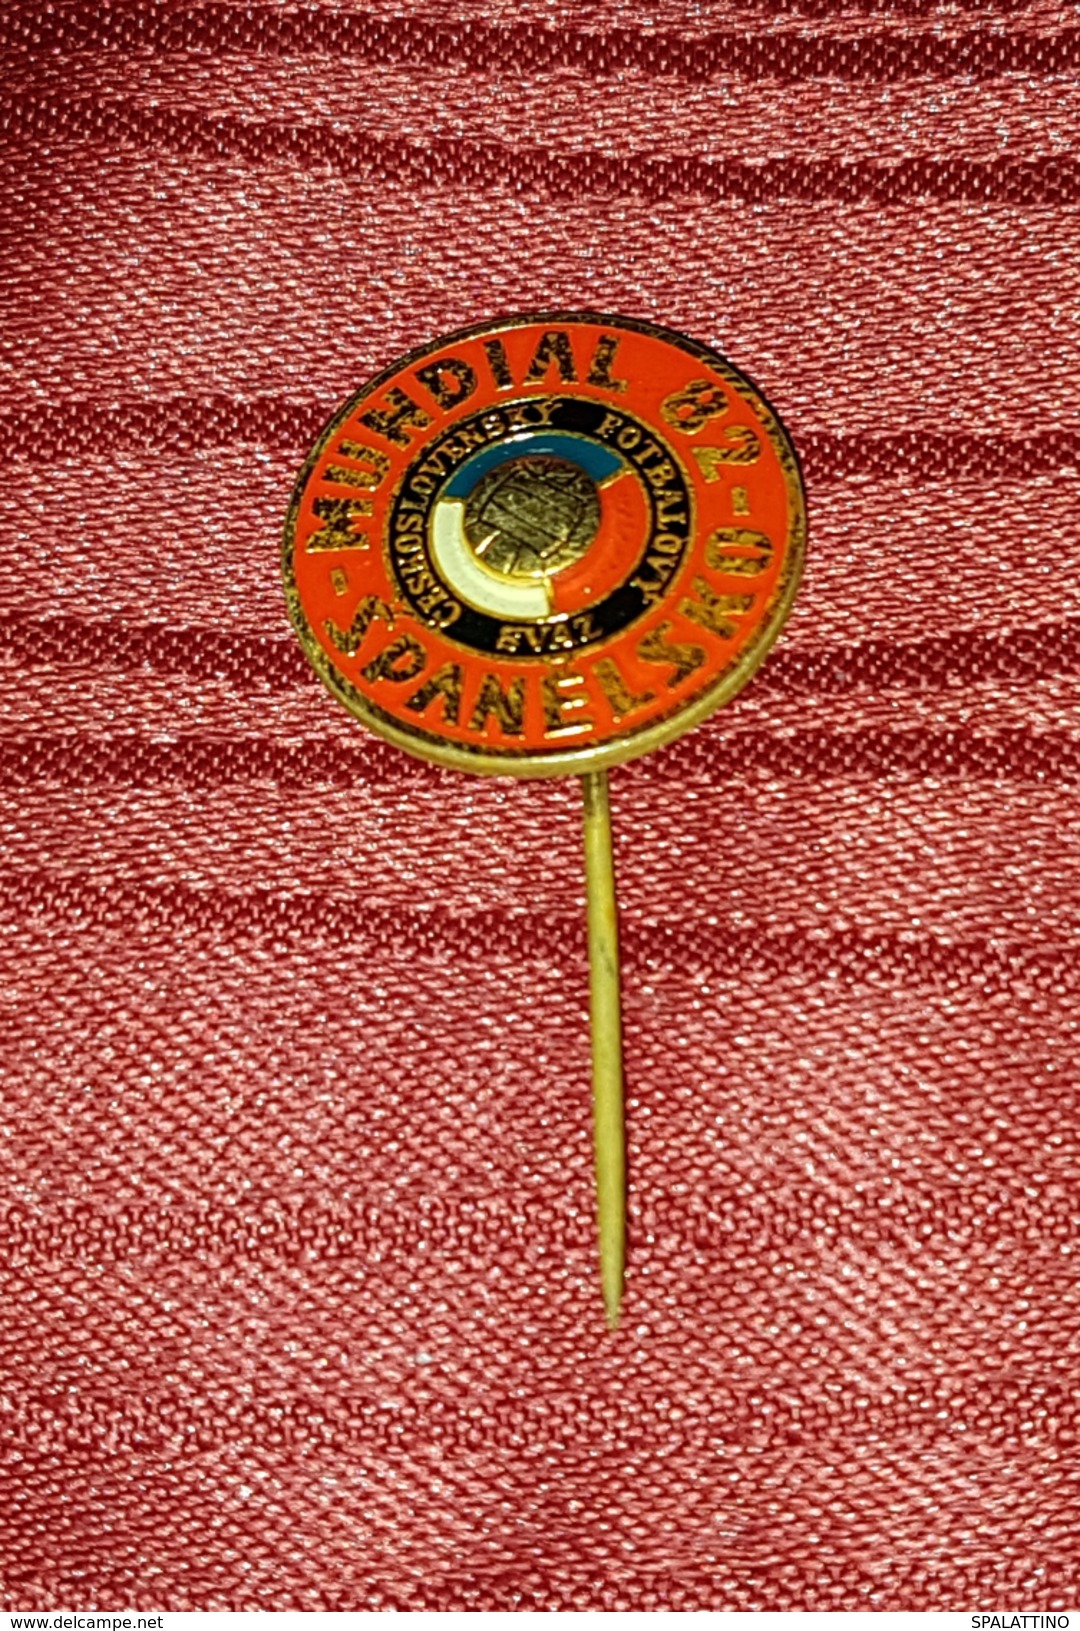 CZECHOSLOVAKIAN FOOTBALL FEDERATION, OFFICIAL PIN FOR WORLD FOOTBALL CHAMPIONSHIP SPAIN '82 - Voetbal